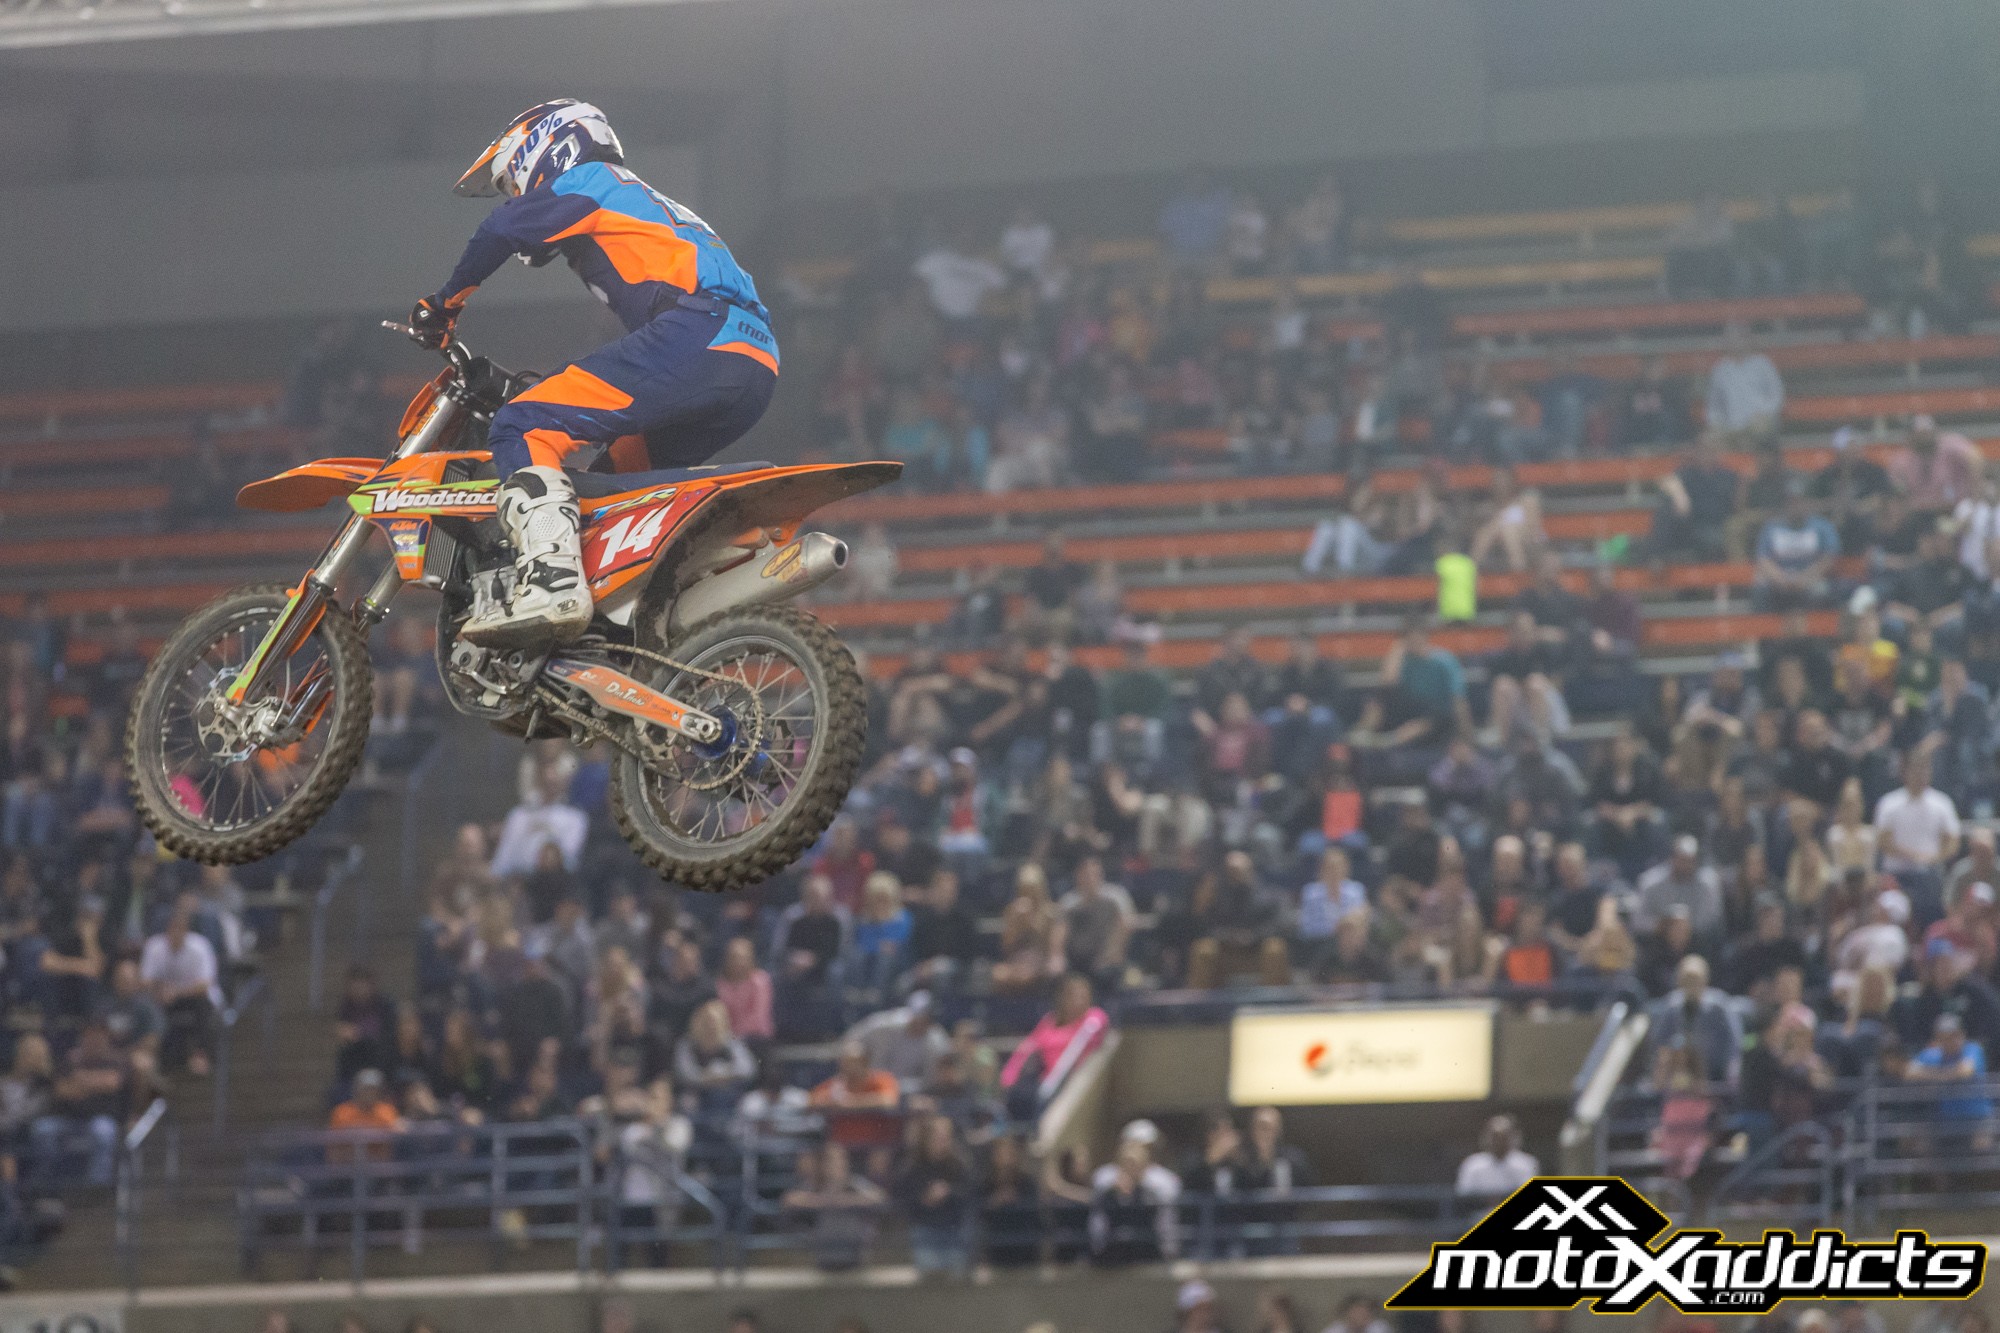 VanBuskirk has opened up a double-digit lead in the Western Regional Arenacross Lites Class Championship. Photo: ShiftOne Photography